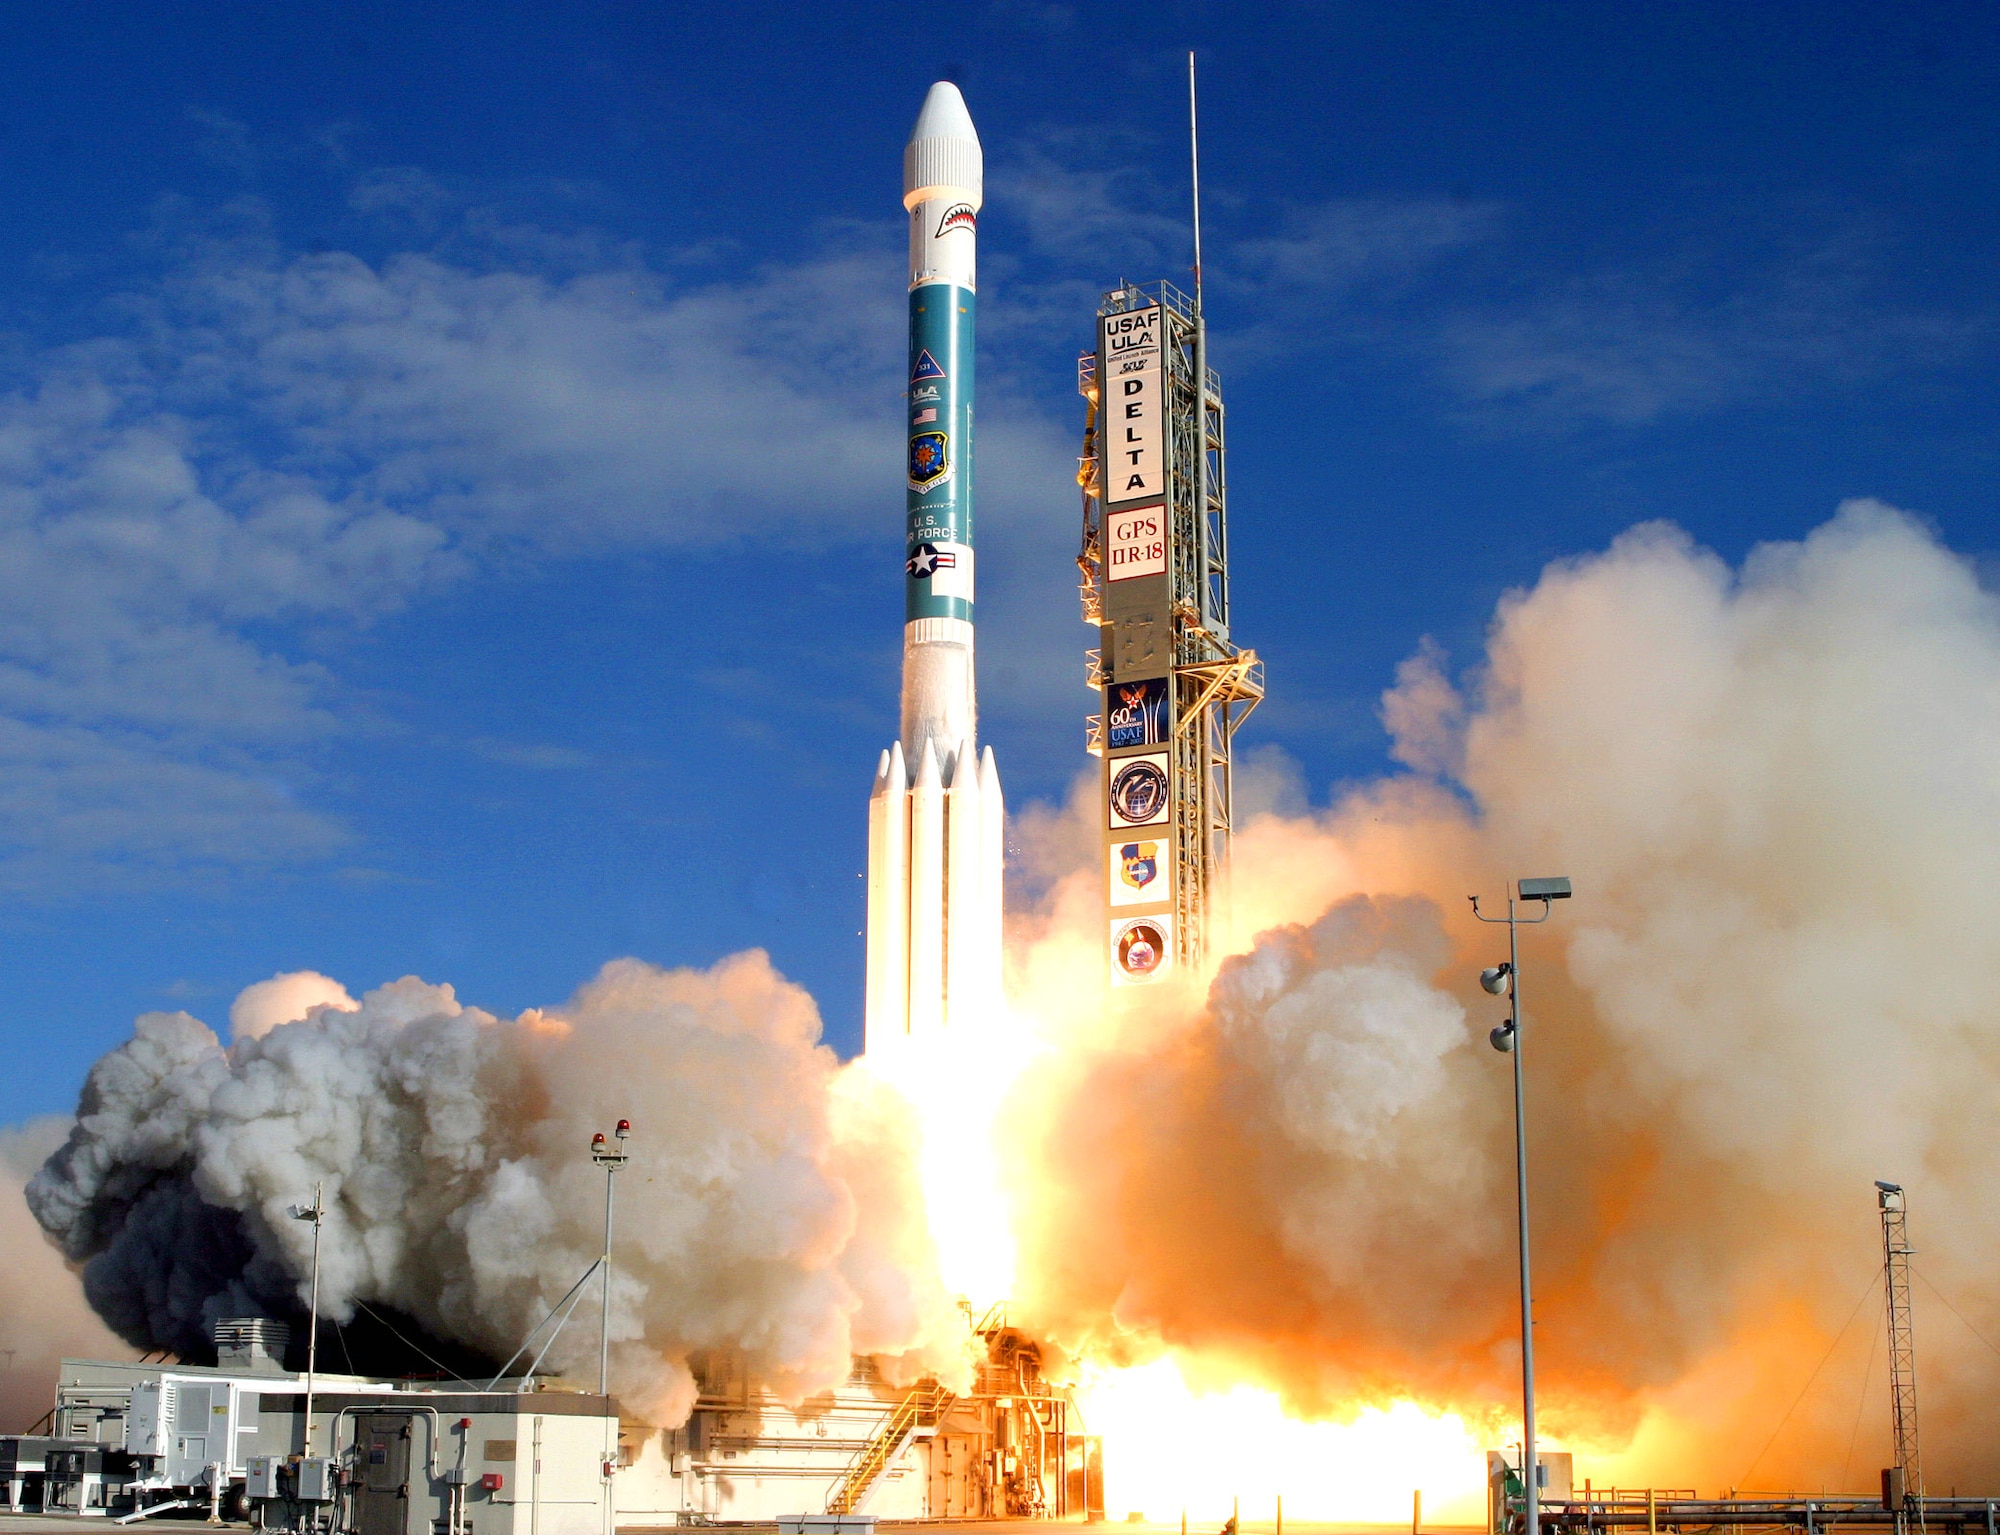 A Delta II rocket carrying a Global Positioning System satellite successfully launches Dec. 21 from Space Launch Complex 17A at Cape Canaveral Air Force Station, Fla. The satellite will join the constellation of on-orbit satellites providing global coverage and increased performance of the GPS services to users worldwide. (Courtesy photo/Carleton Bailie)